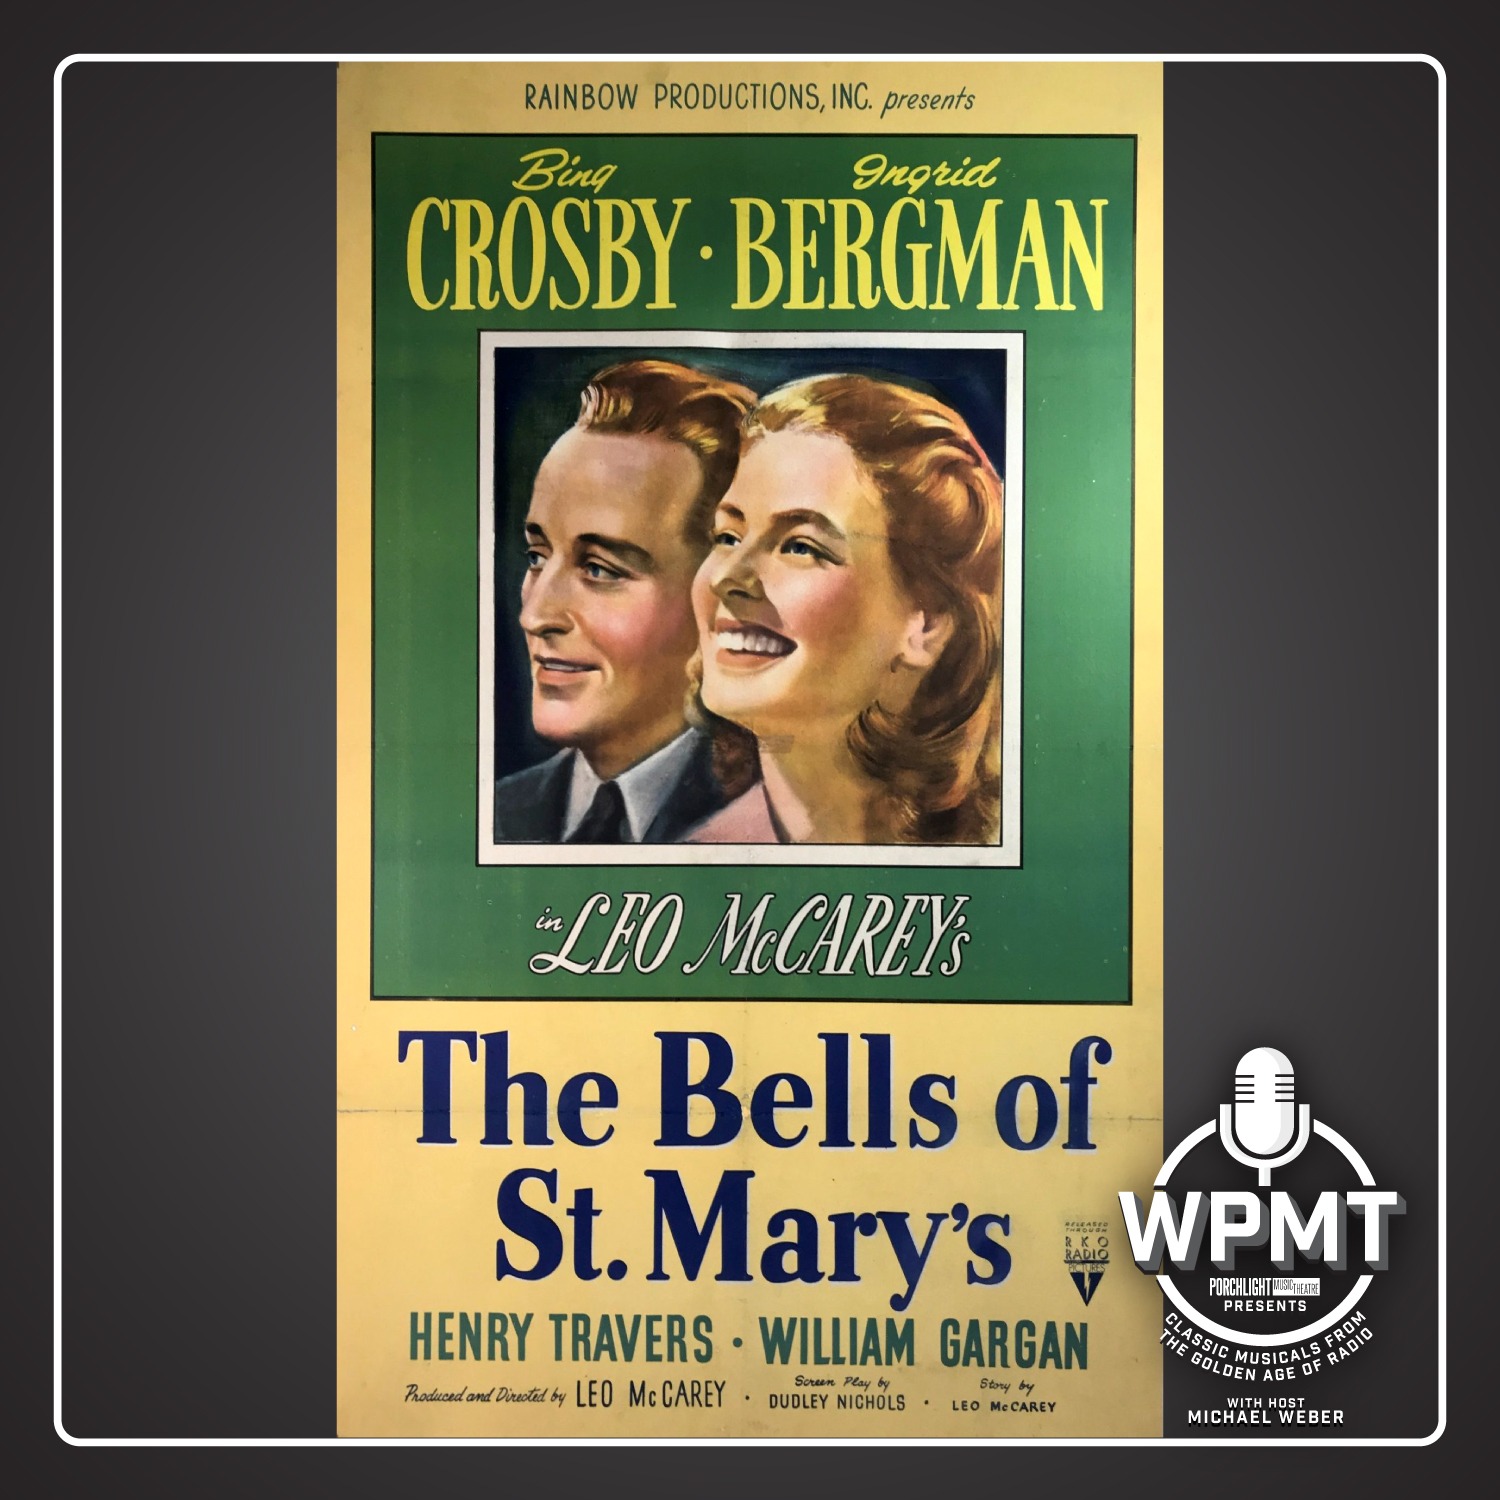 WPMT #114: The Bells of St. Mary's